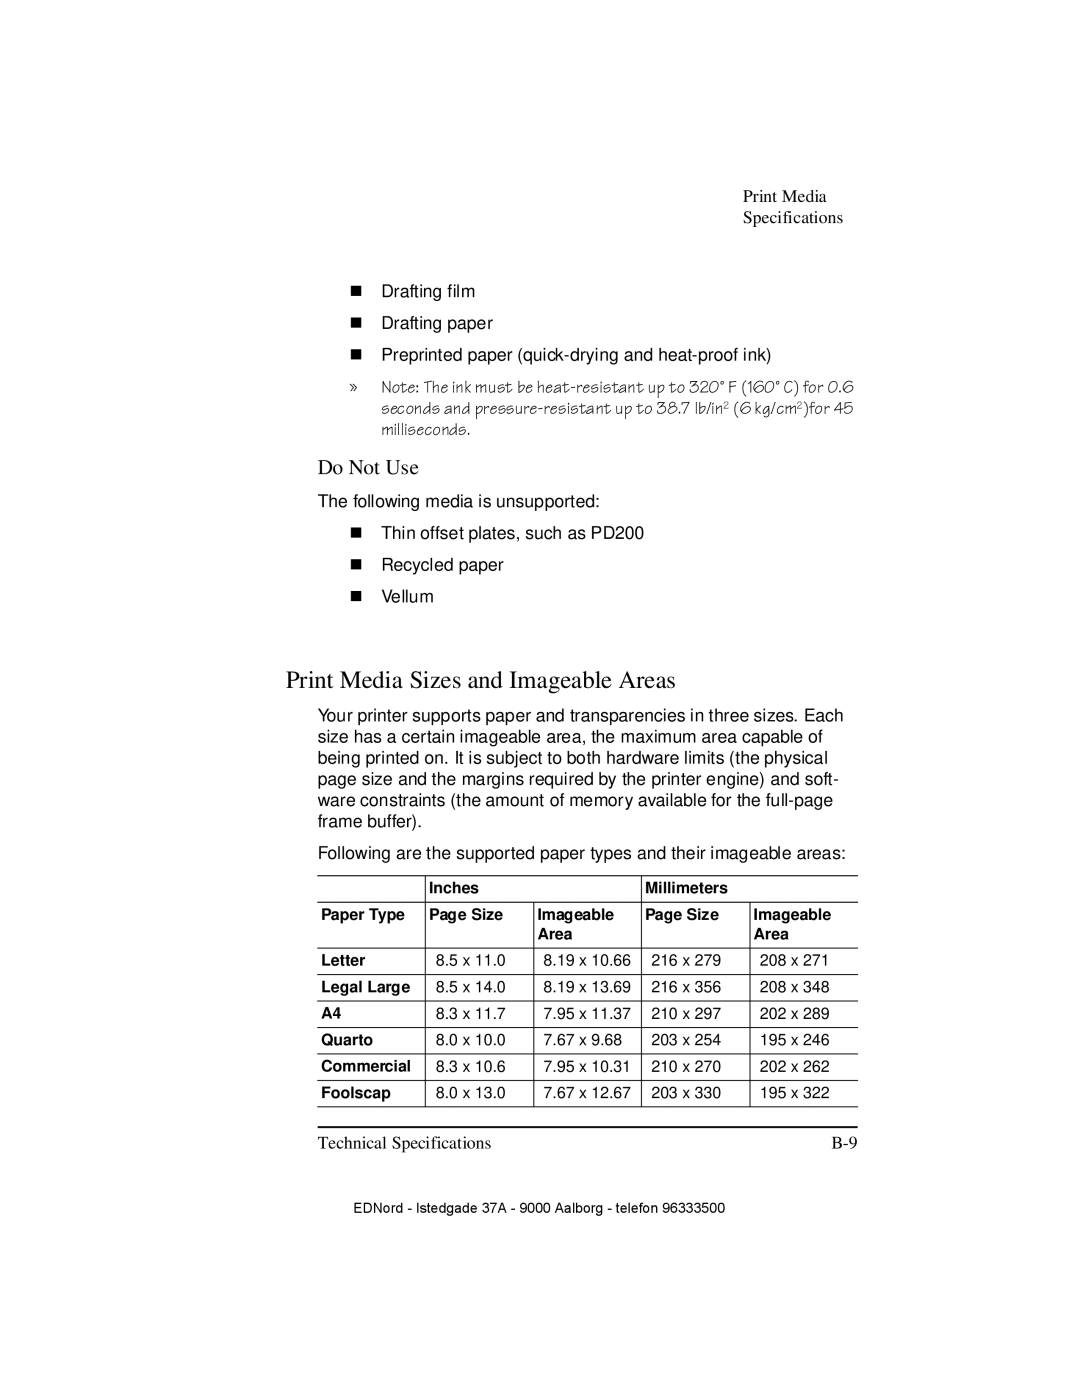 IBM QMS 4525 manual Print Media Sizes and Imageable Areas, Do Not Use 